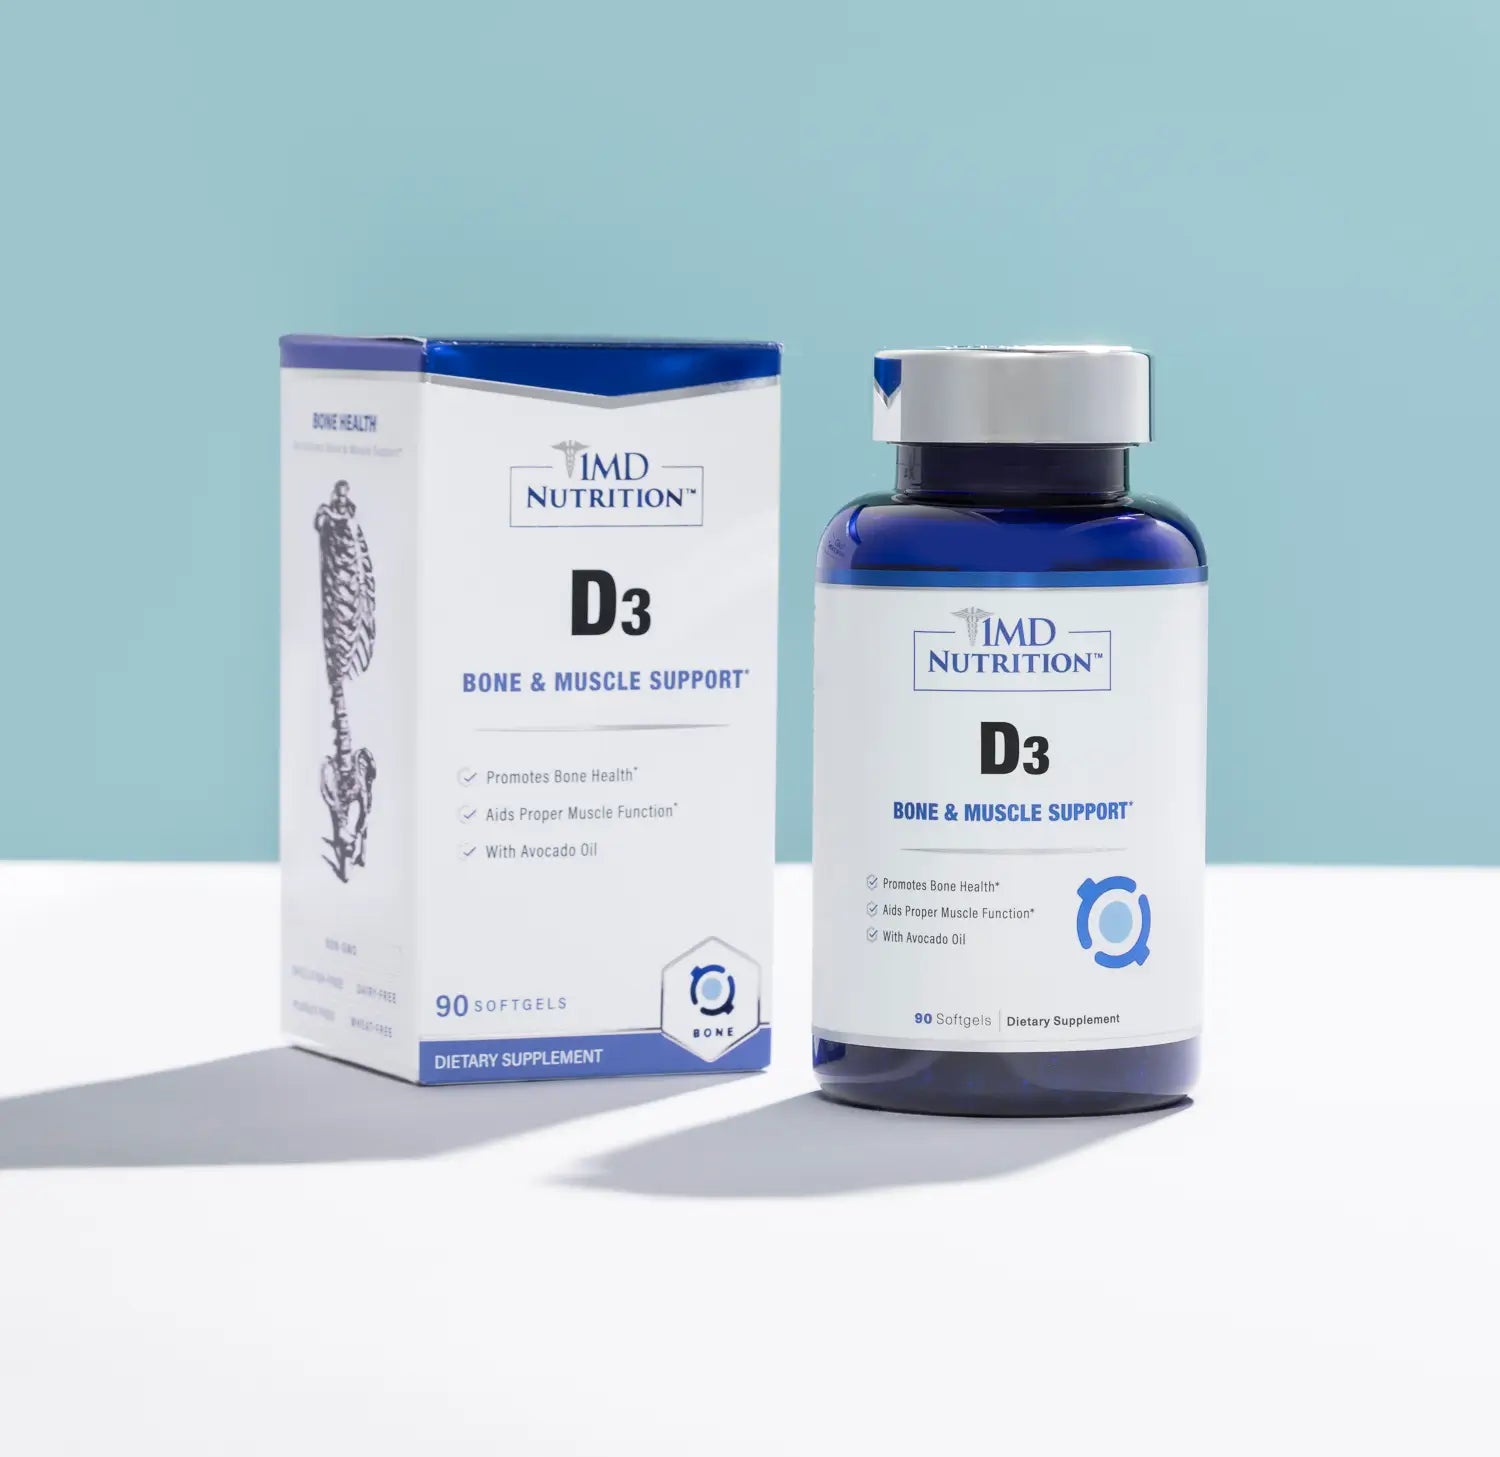 1MD Nutrition D3 box and bottle